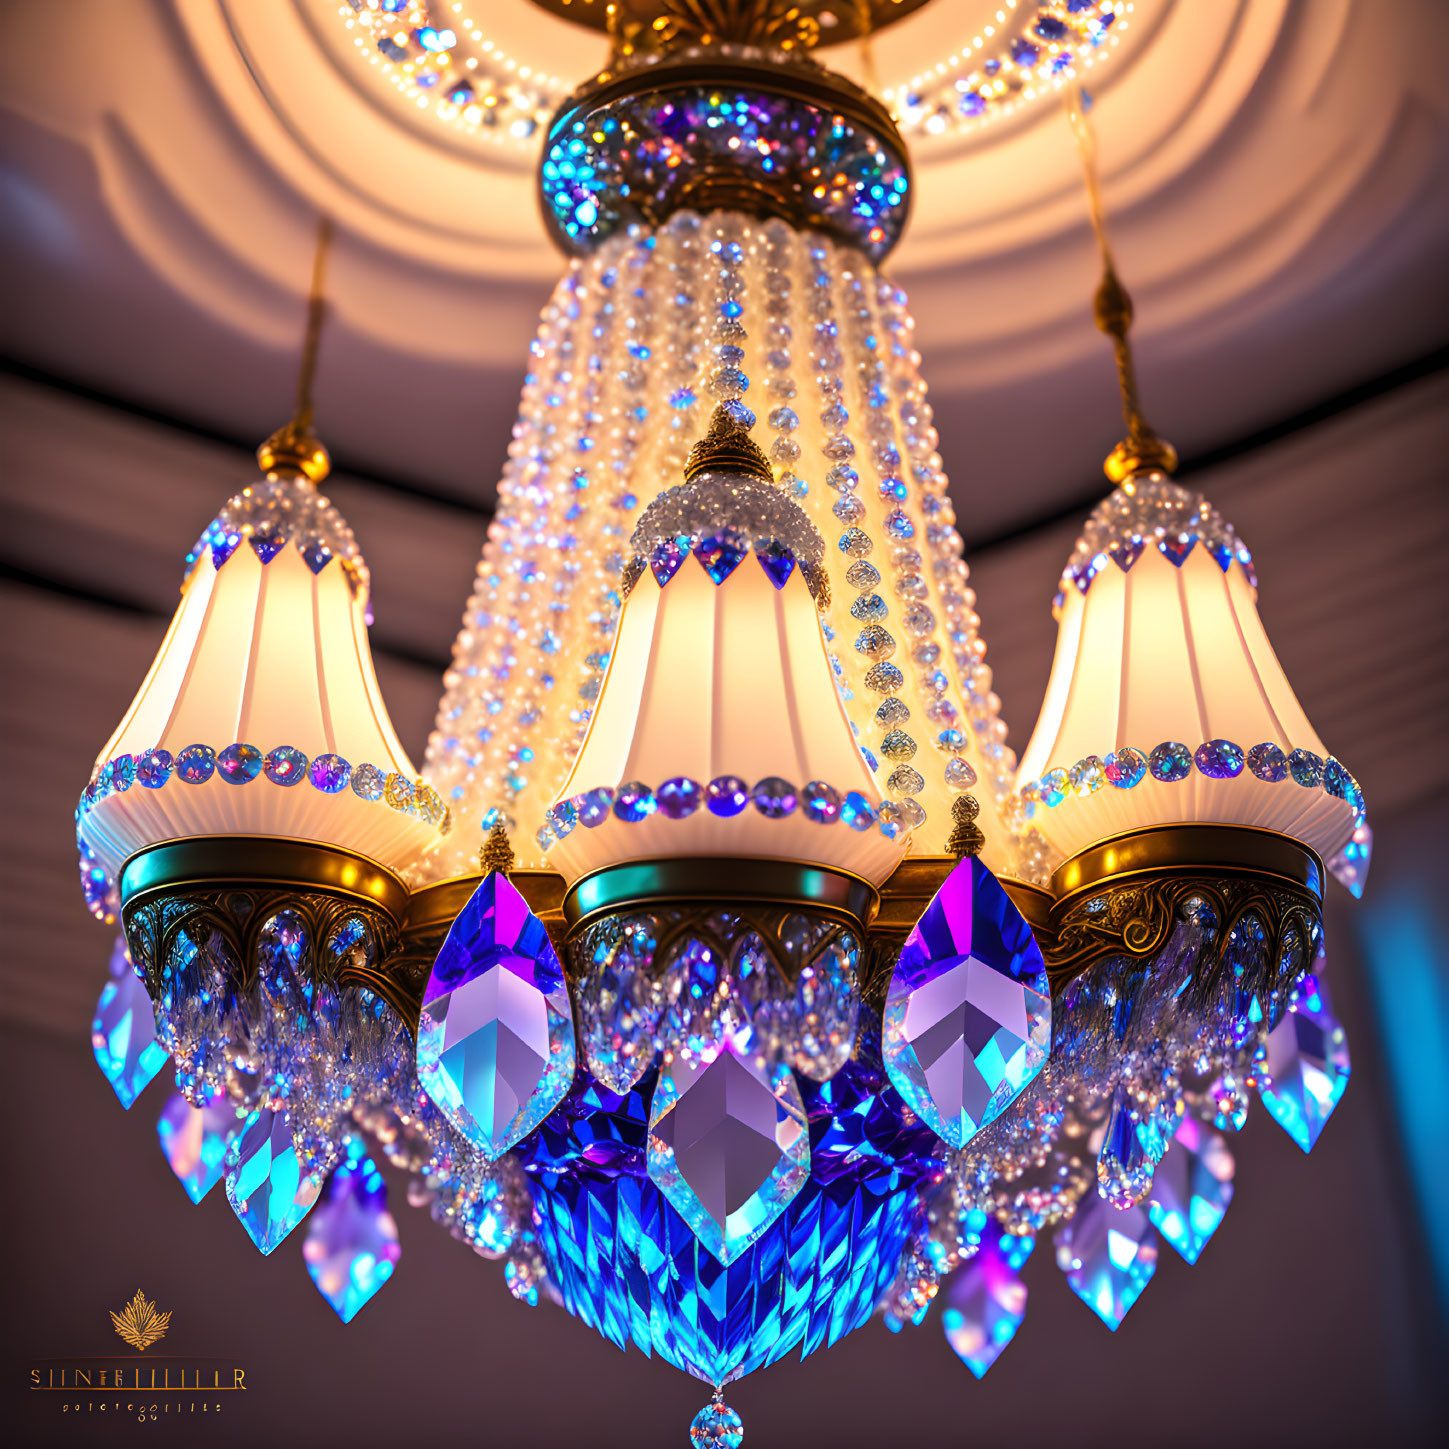 Crystal Bead Chandelier with Purple Pendants and Lampshades against Cream Ceiling